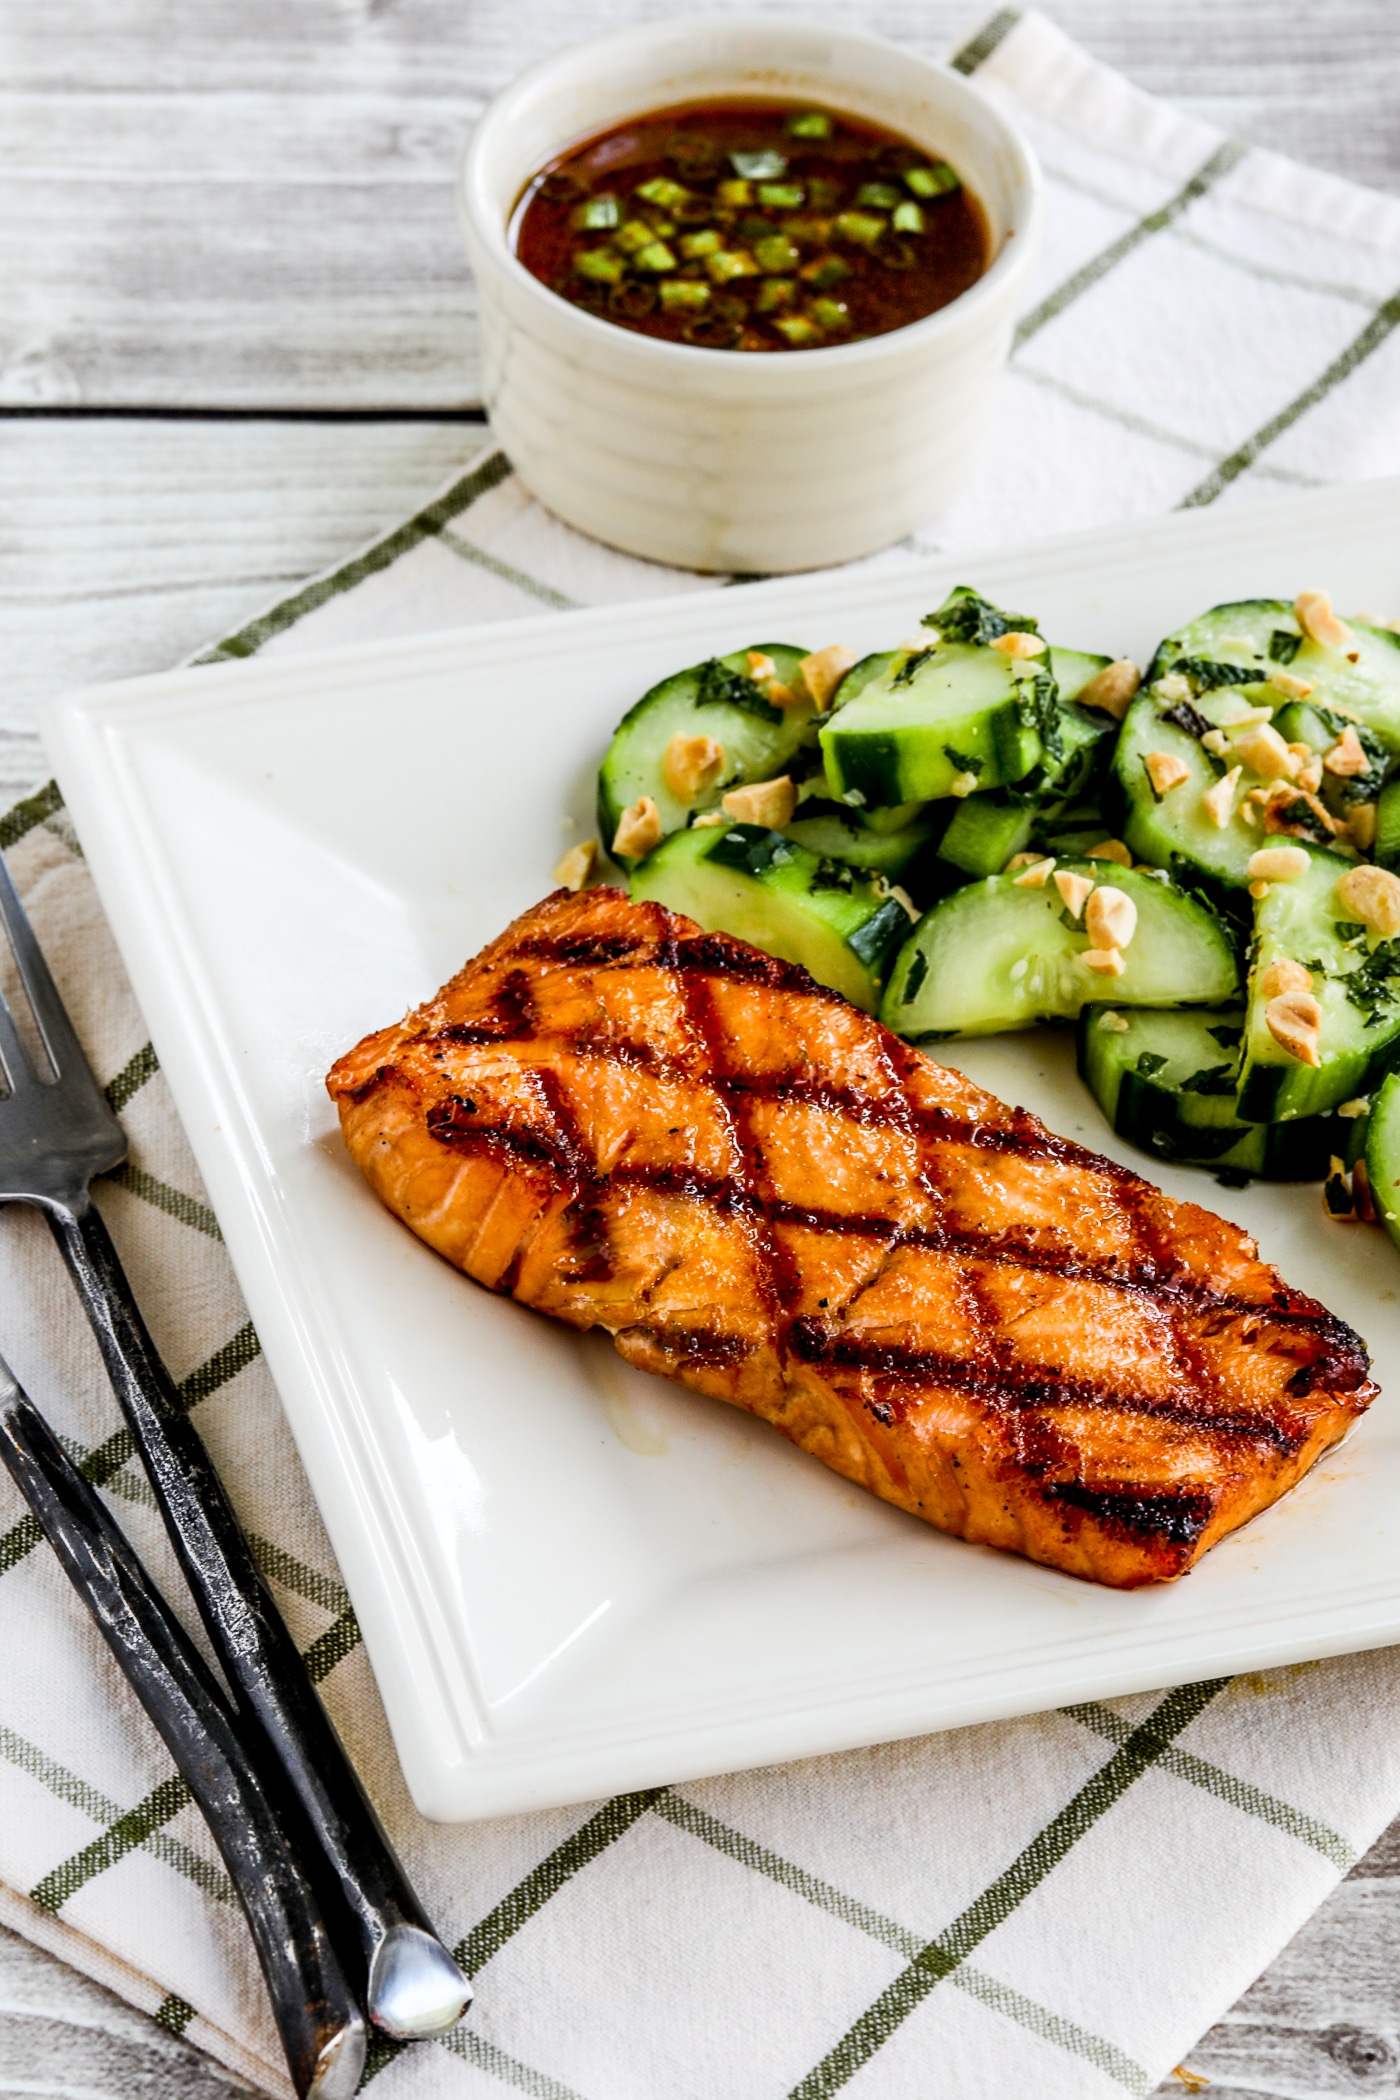 Korean salmon with dipping sauce as shown in the serving dish with Thai cucumber salad